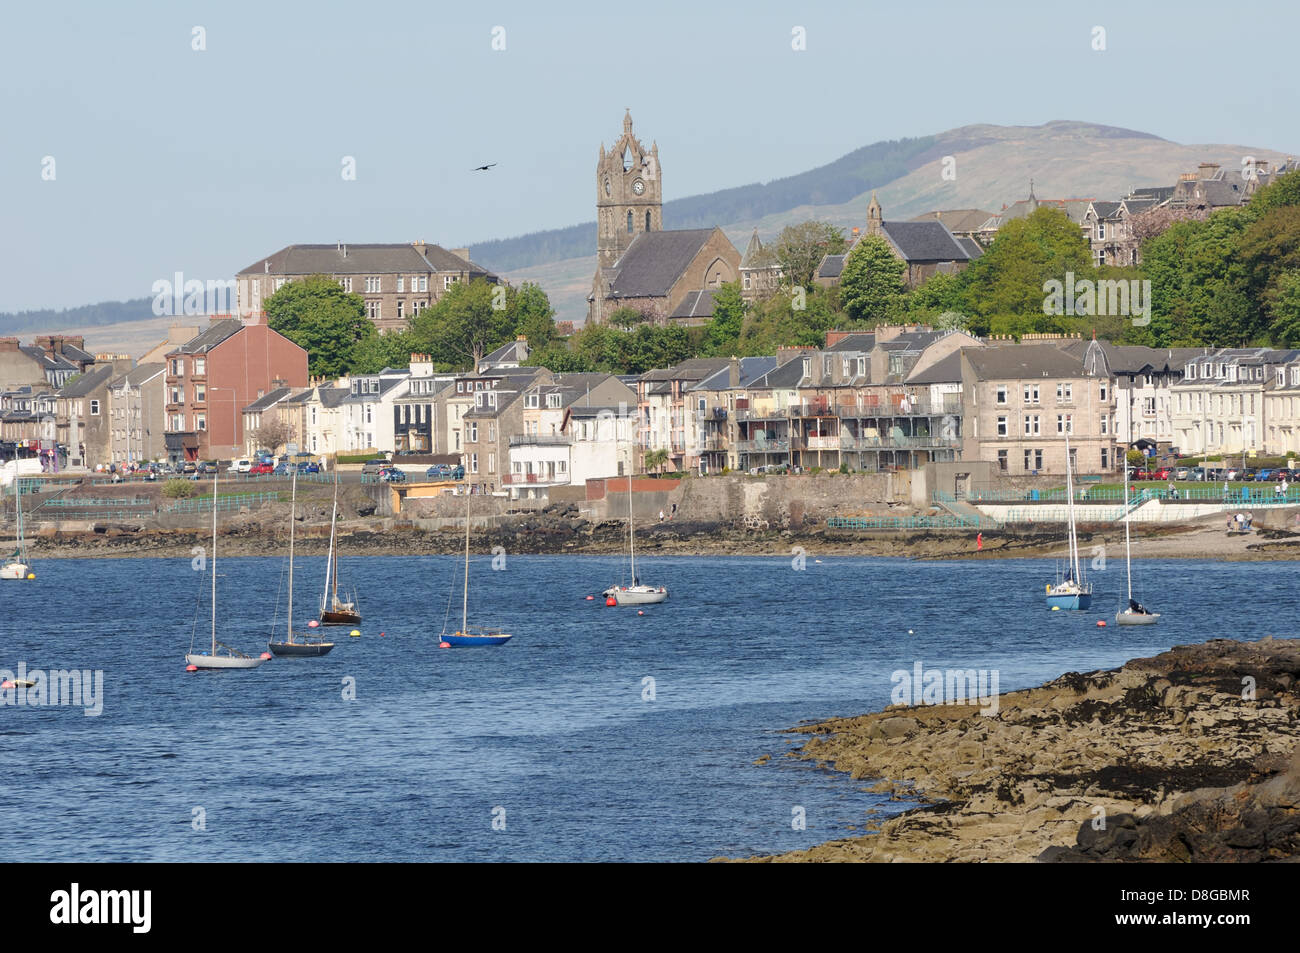 Seafront view of Gourock, Scotland, where small yachts are moored off the rocky shore Stock Photo